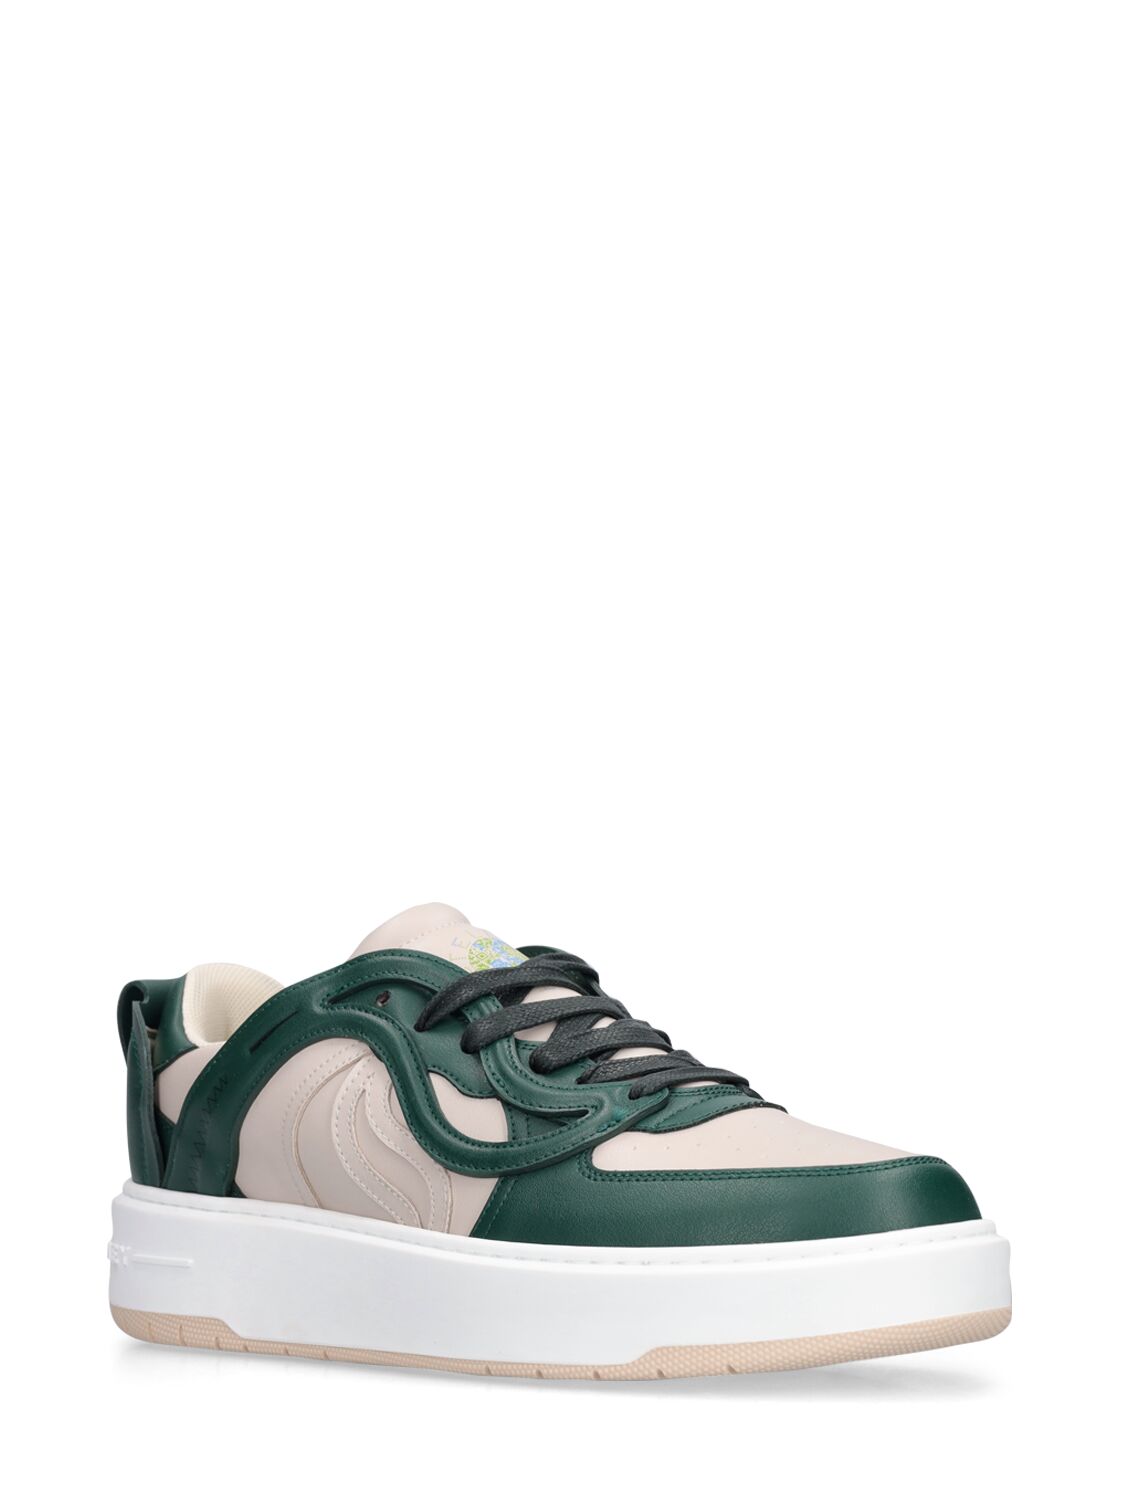 Shop Stella Mccartney 25mm S-wave 1 Alter Sneakers In Green,white